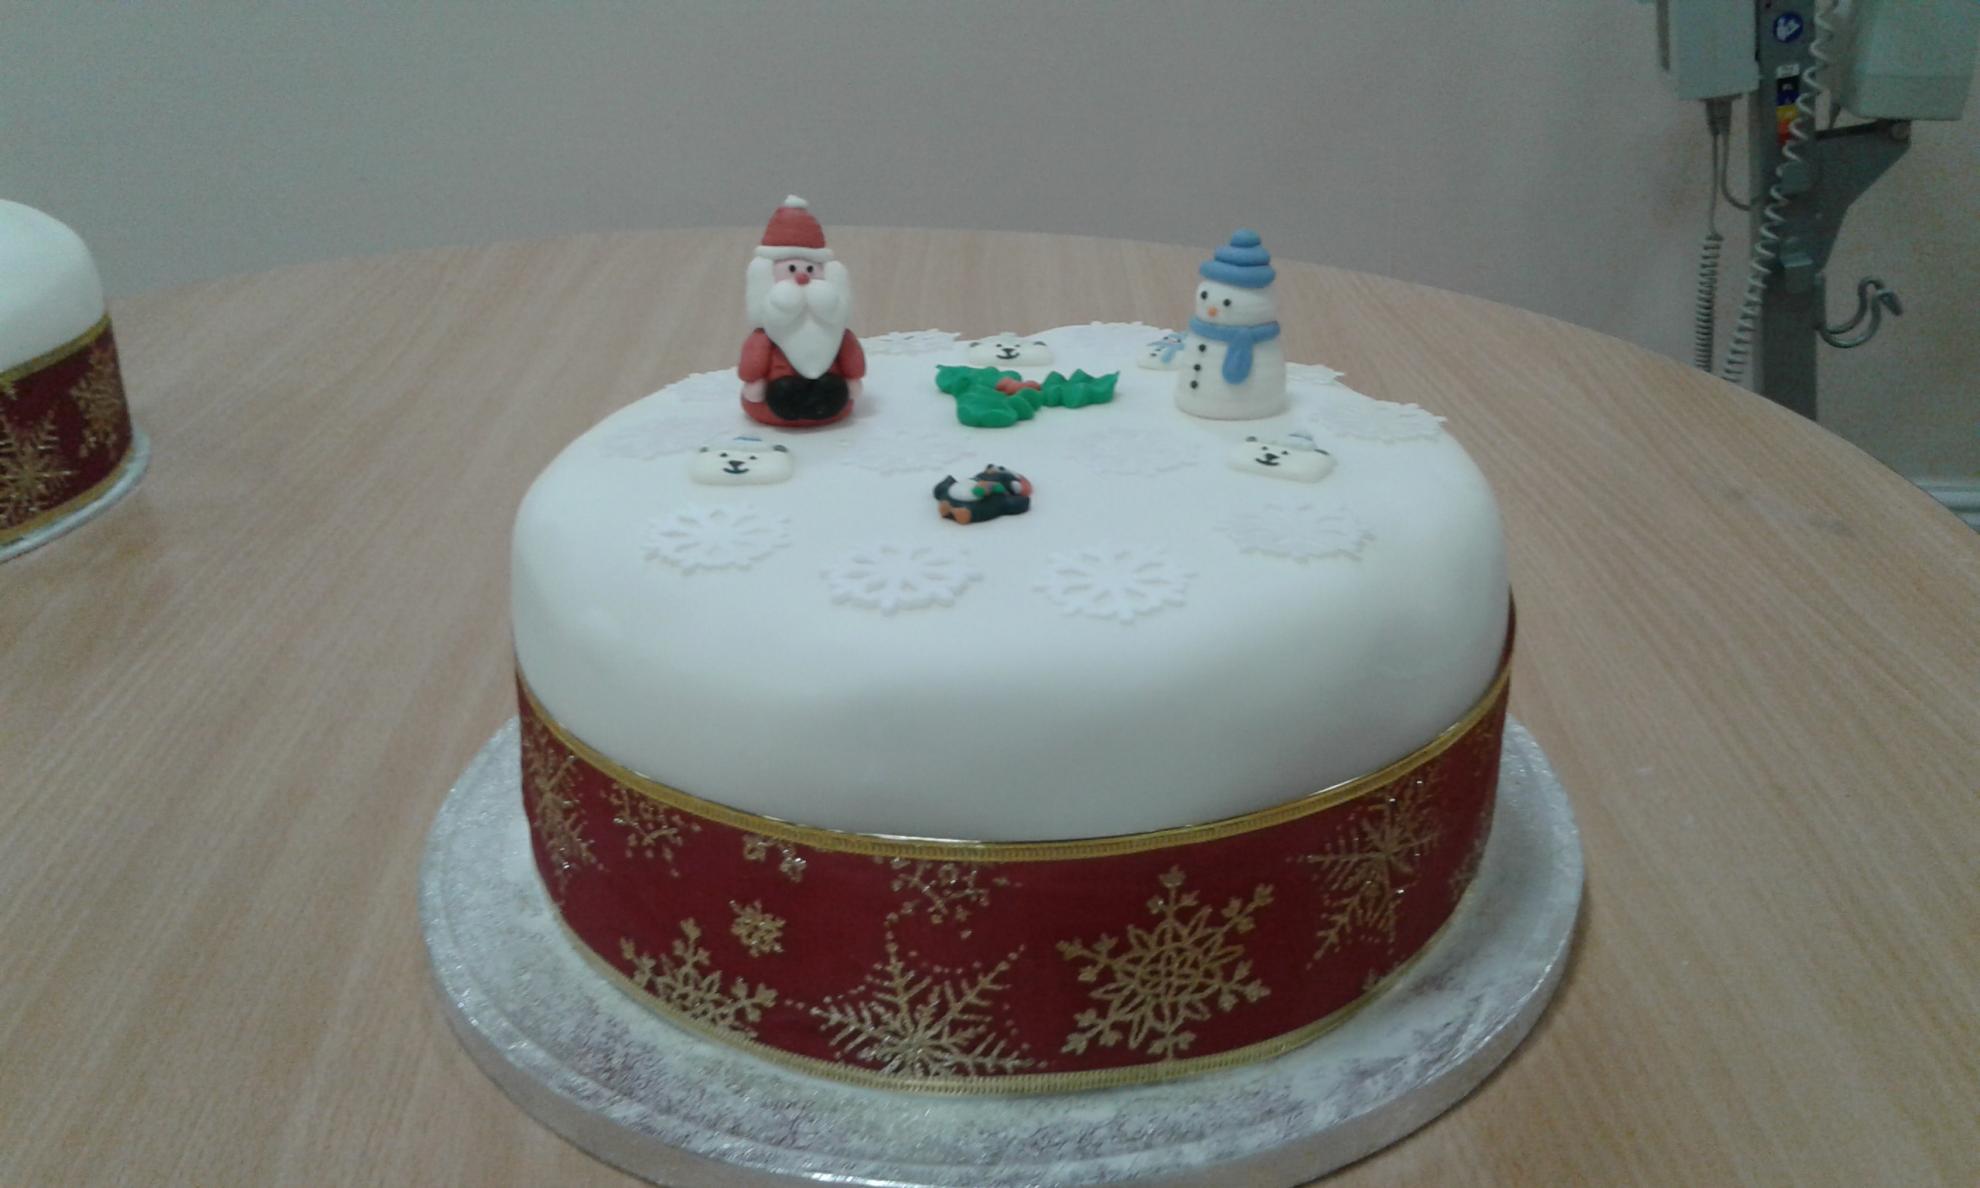 Cake made by Eaton Court Nursing Home